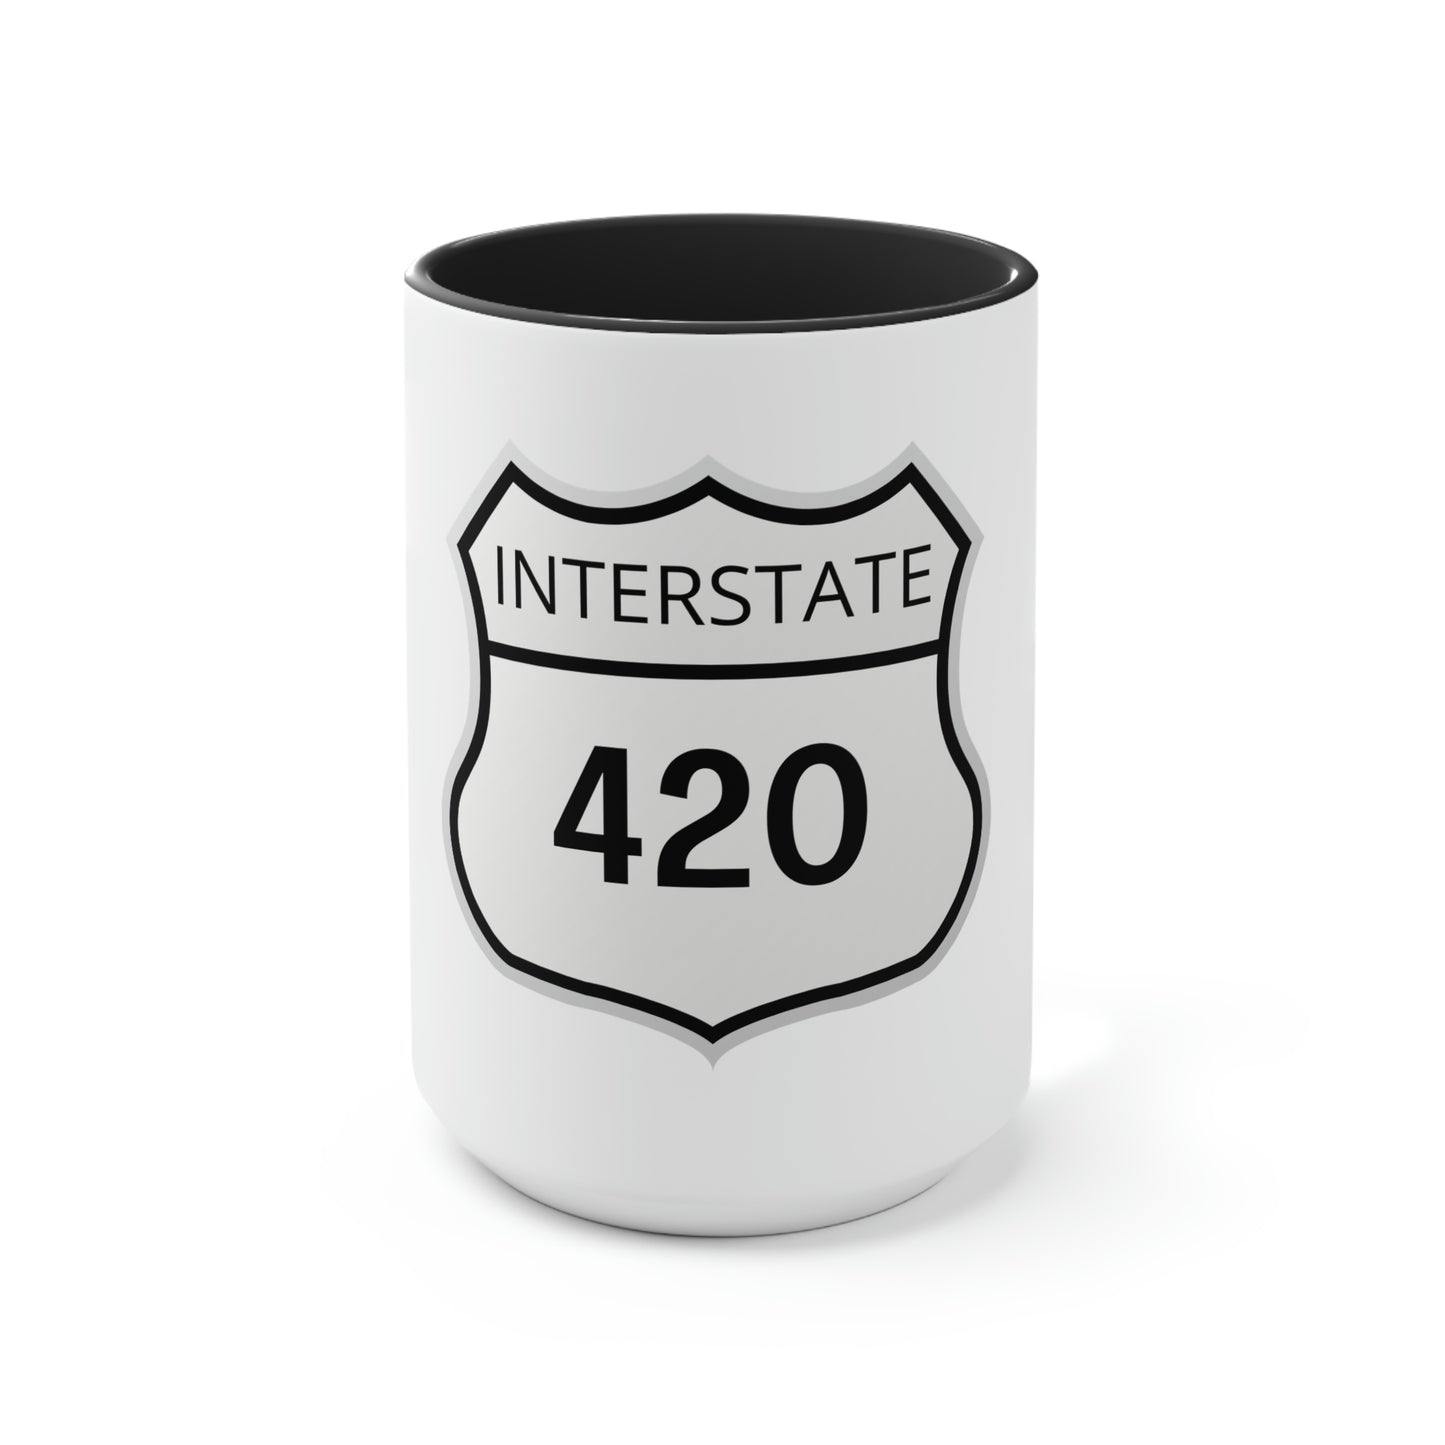 Interstate 420 Two-Tone black and white Coffee Mug - Highway sign-inspired design for cannabis enthusiasts.